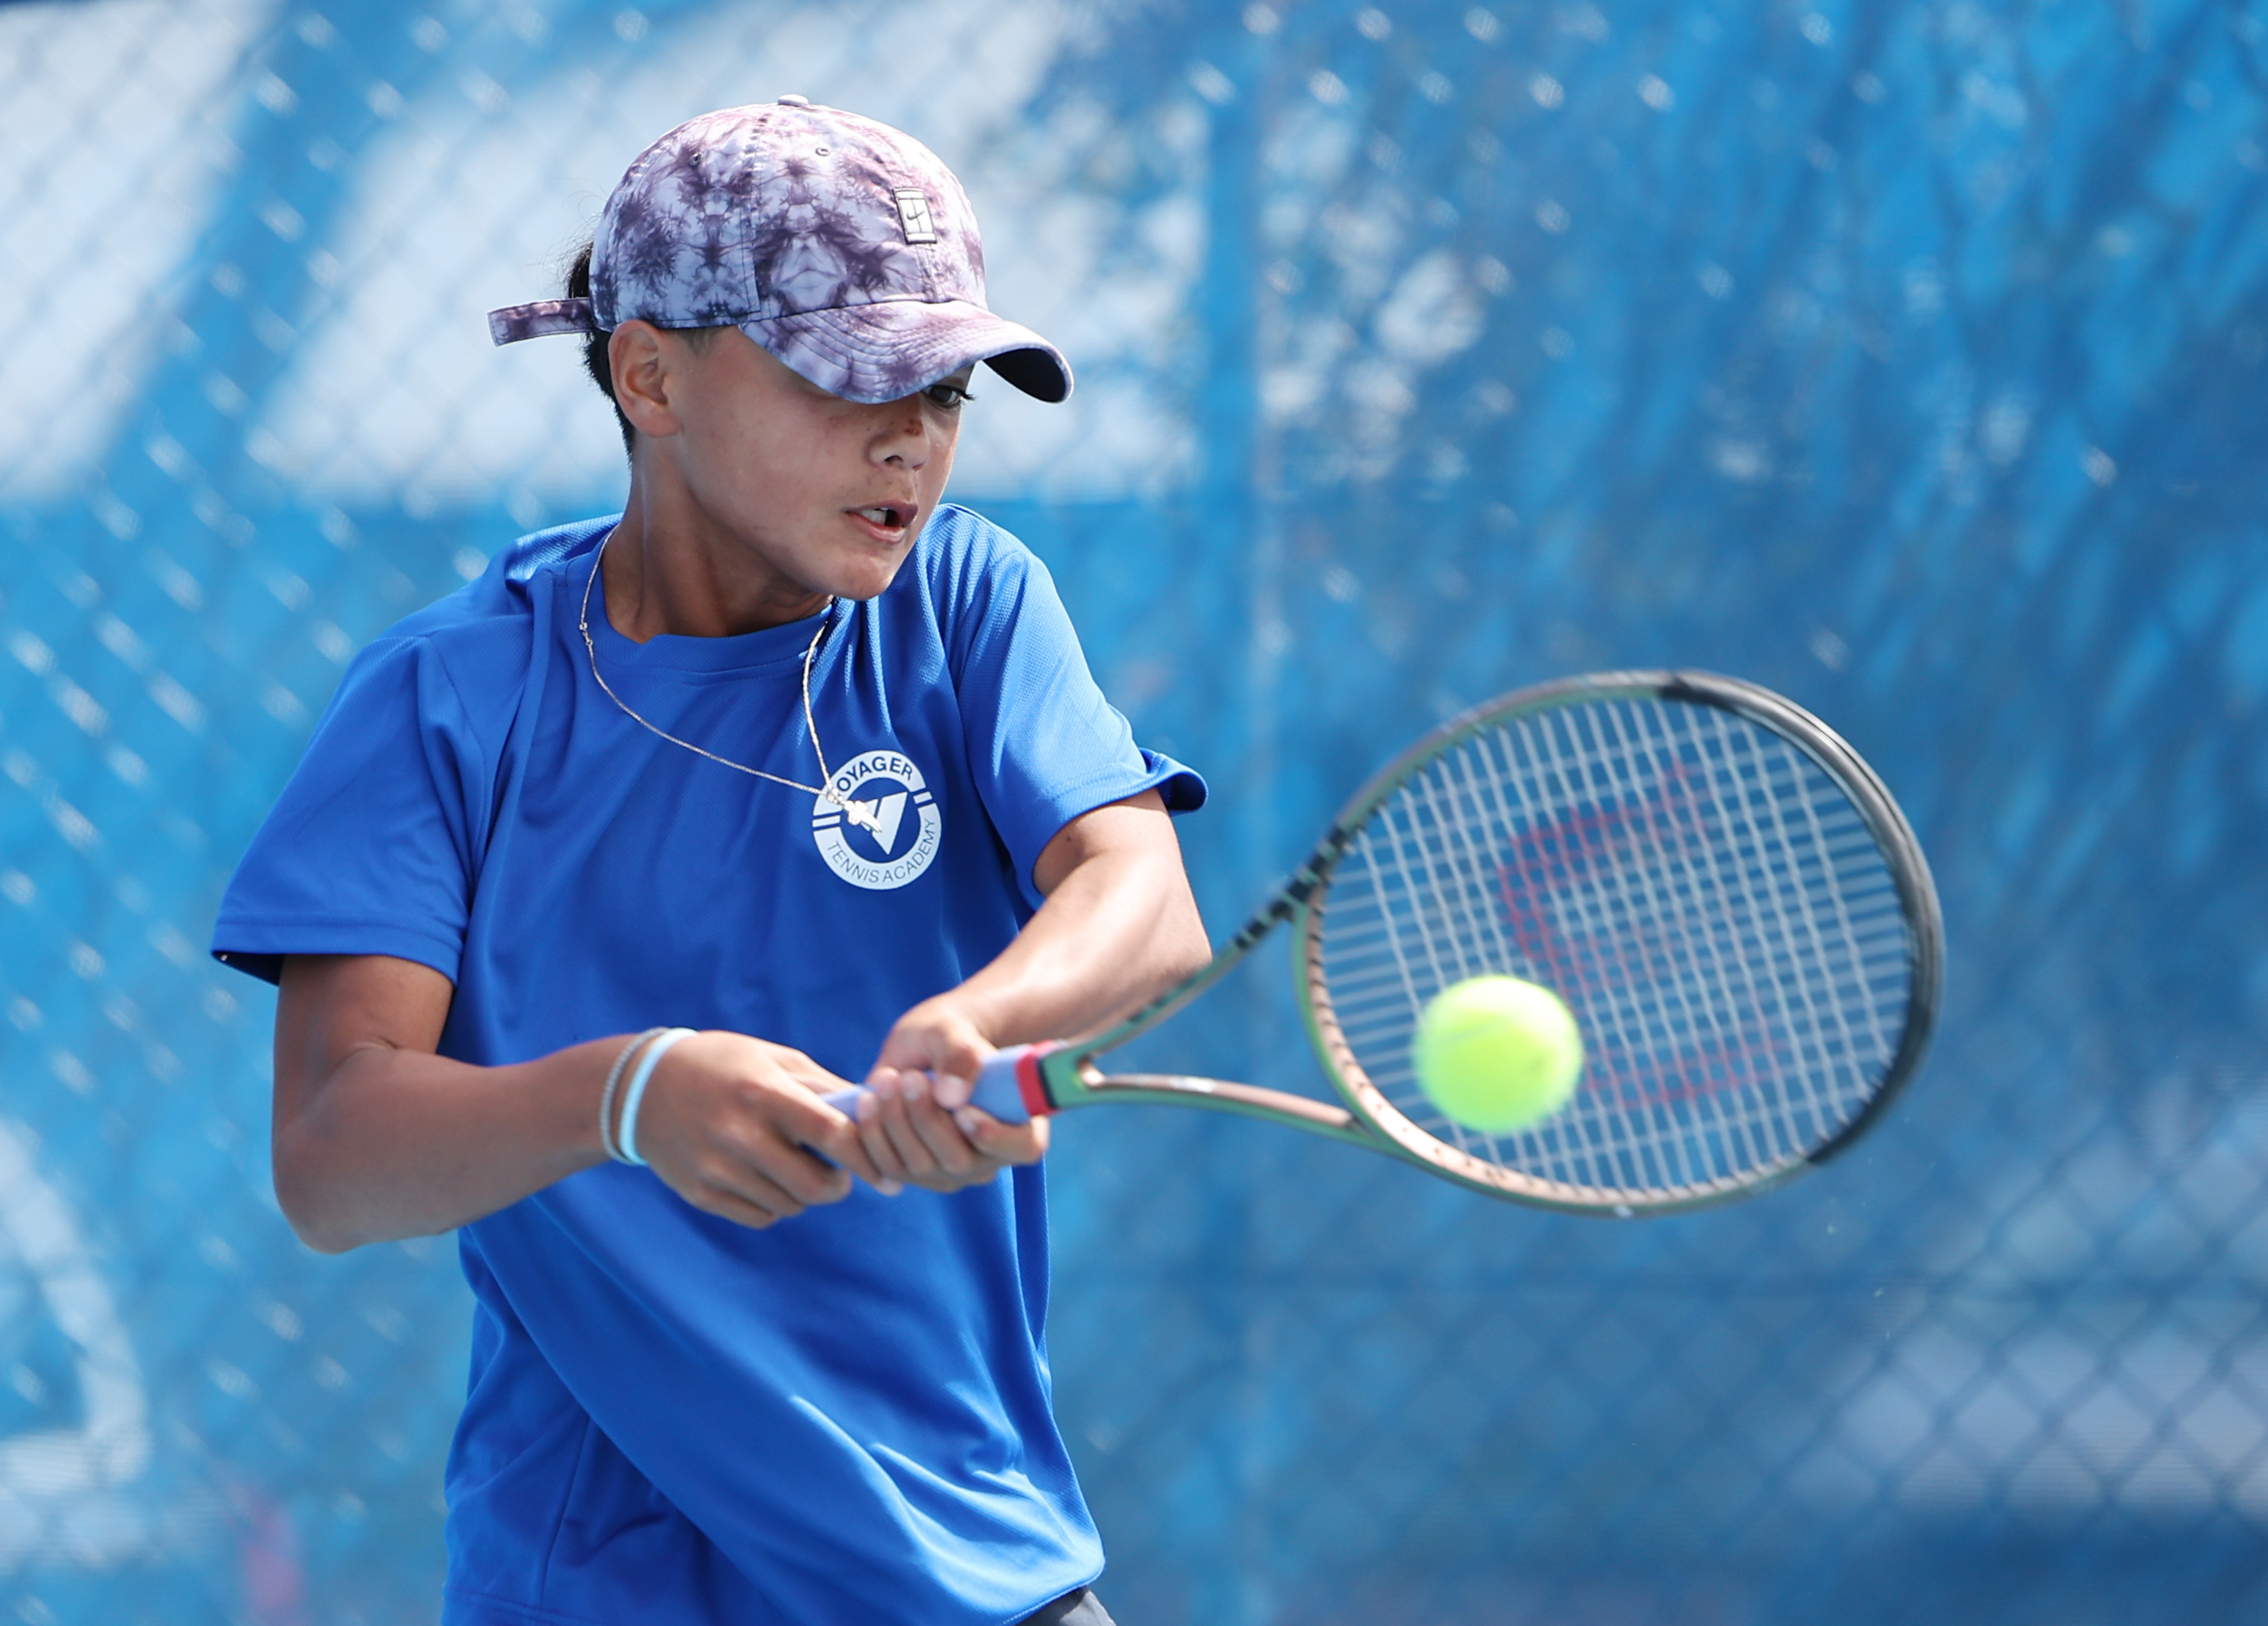 Australian Claycourt Championships to take place in Canberra this week